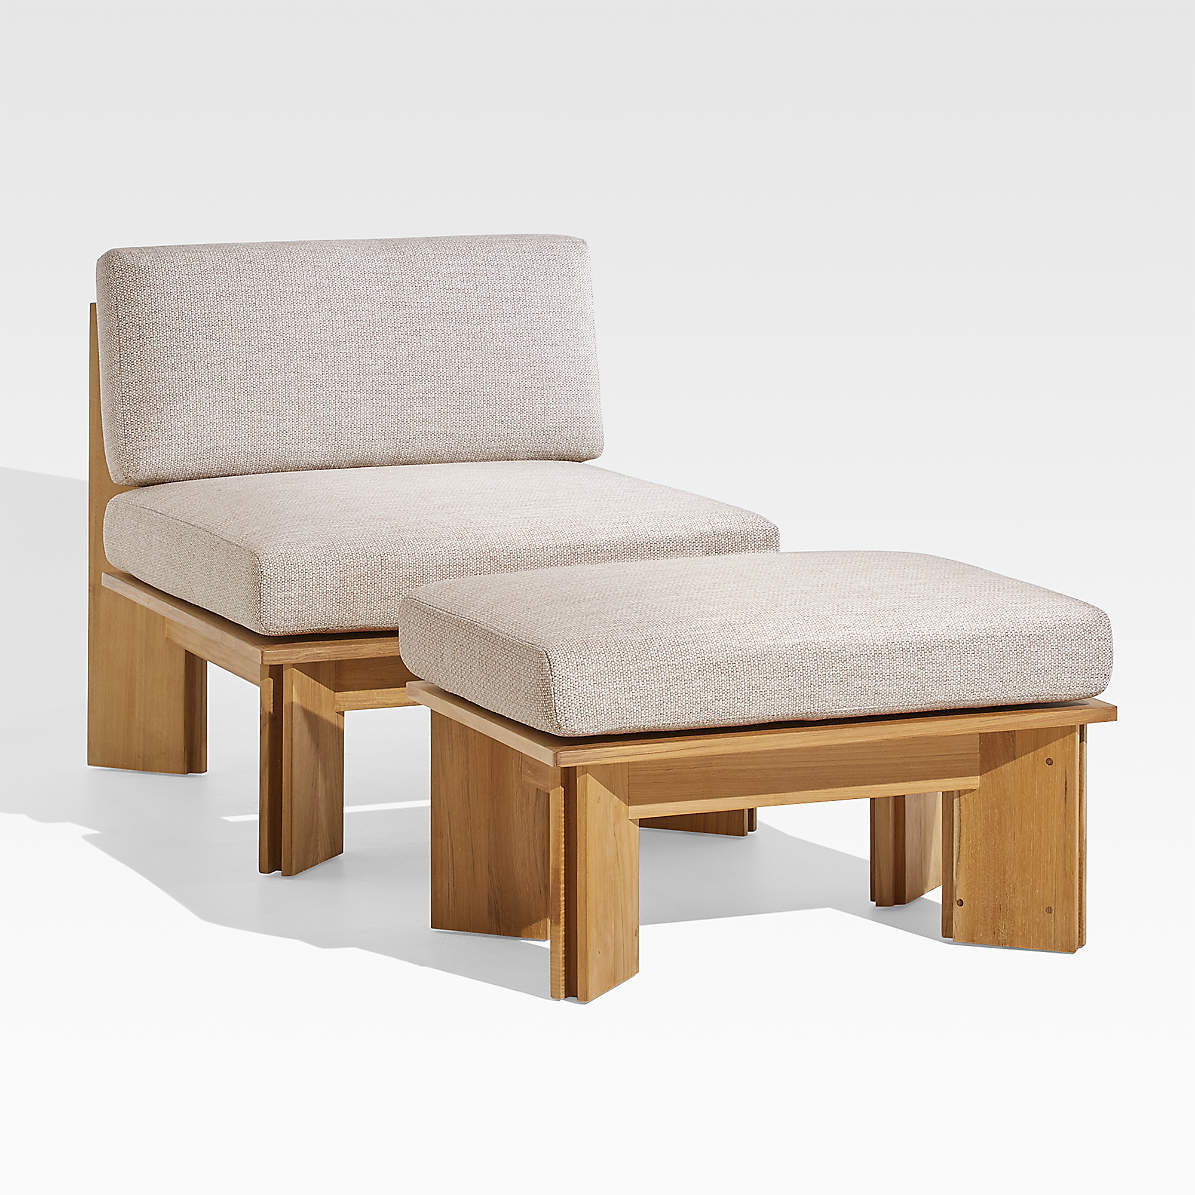 Olivos Teak Outdoor Lounge Chair With Ottoman Crate And Barrel Canada - Teak Garden Furniture Canada